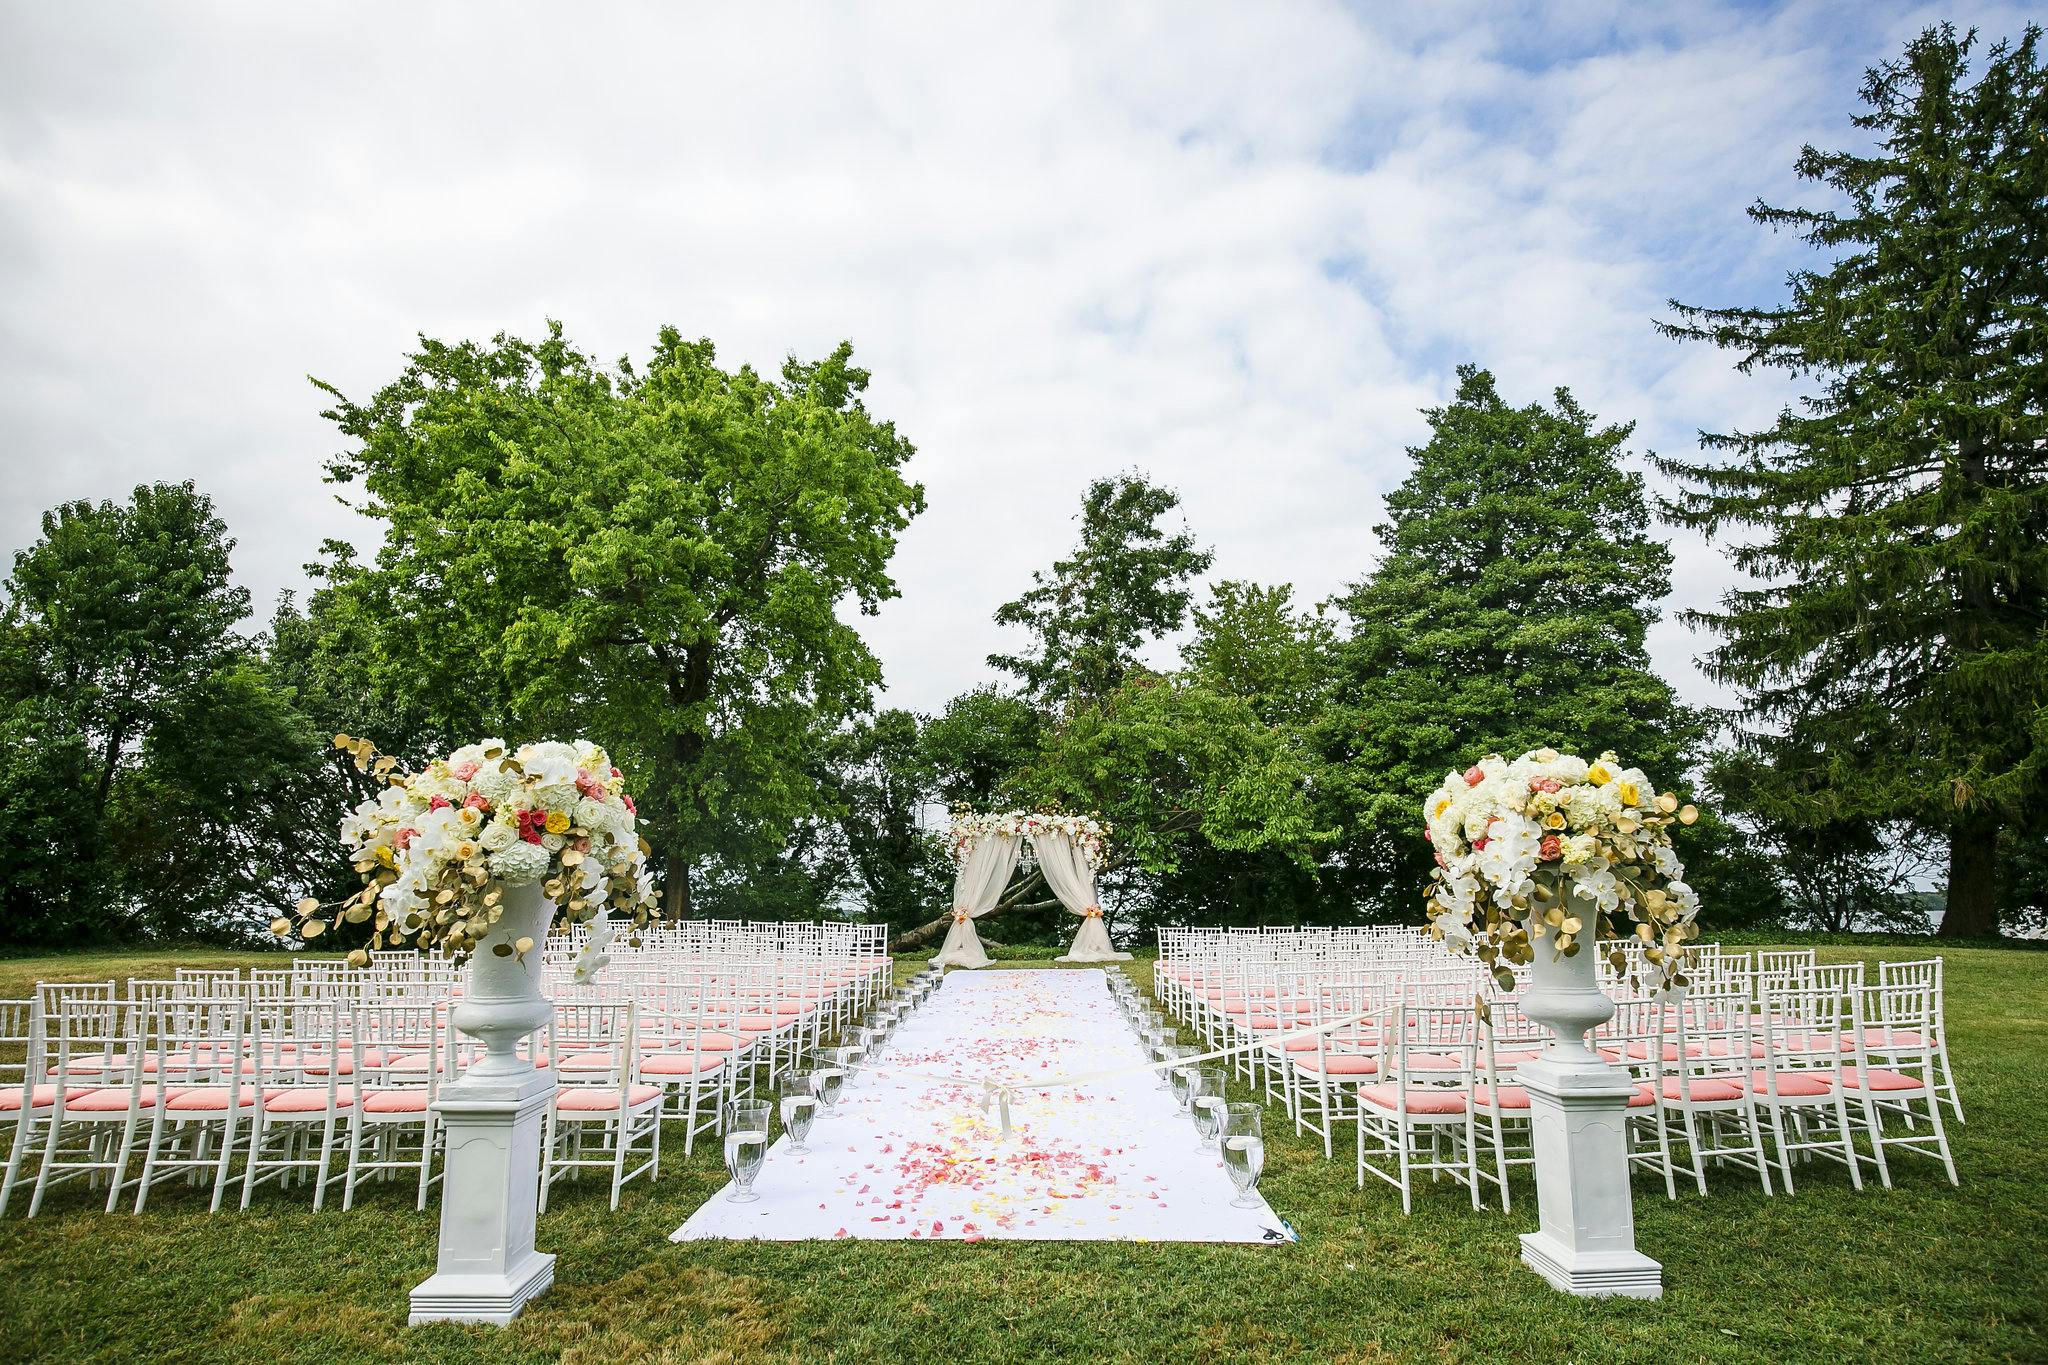 Outdoor Wedding Ceremony With Unique Pink Seat Cushions | PartySlate